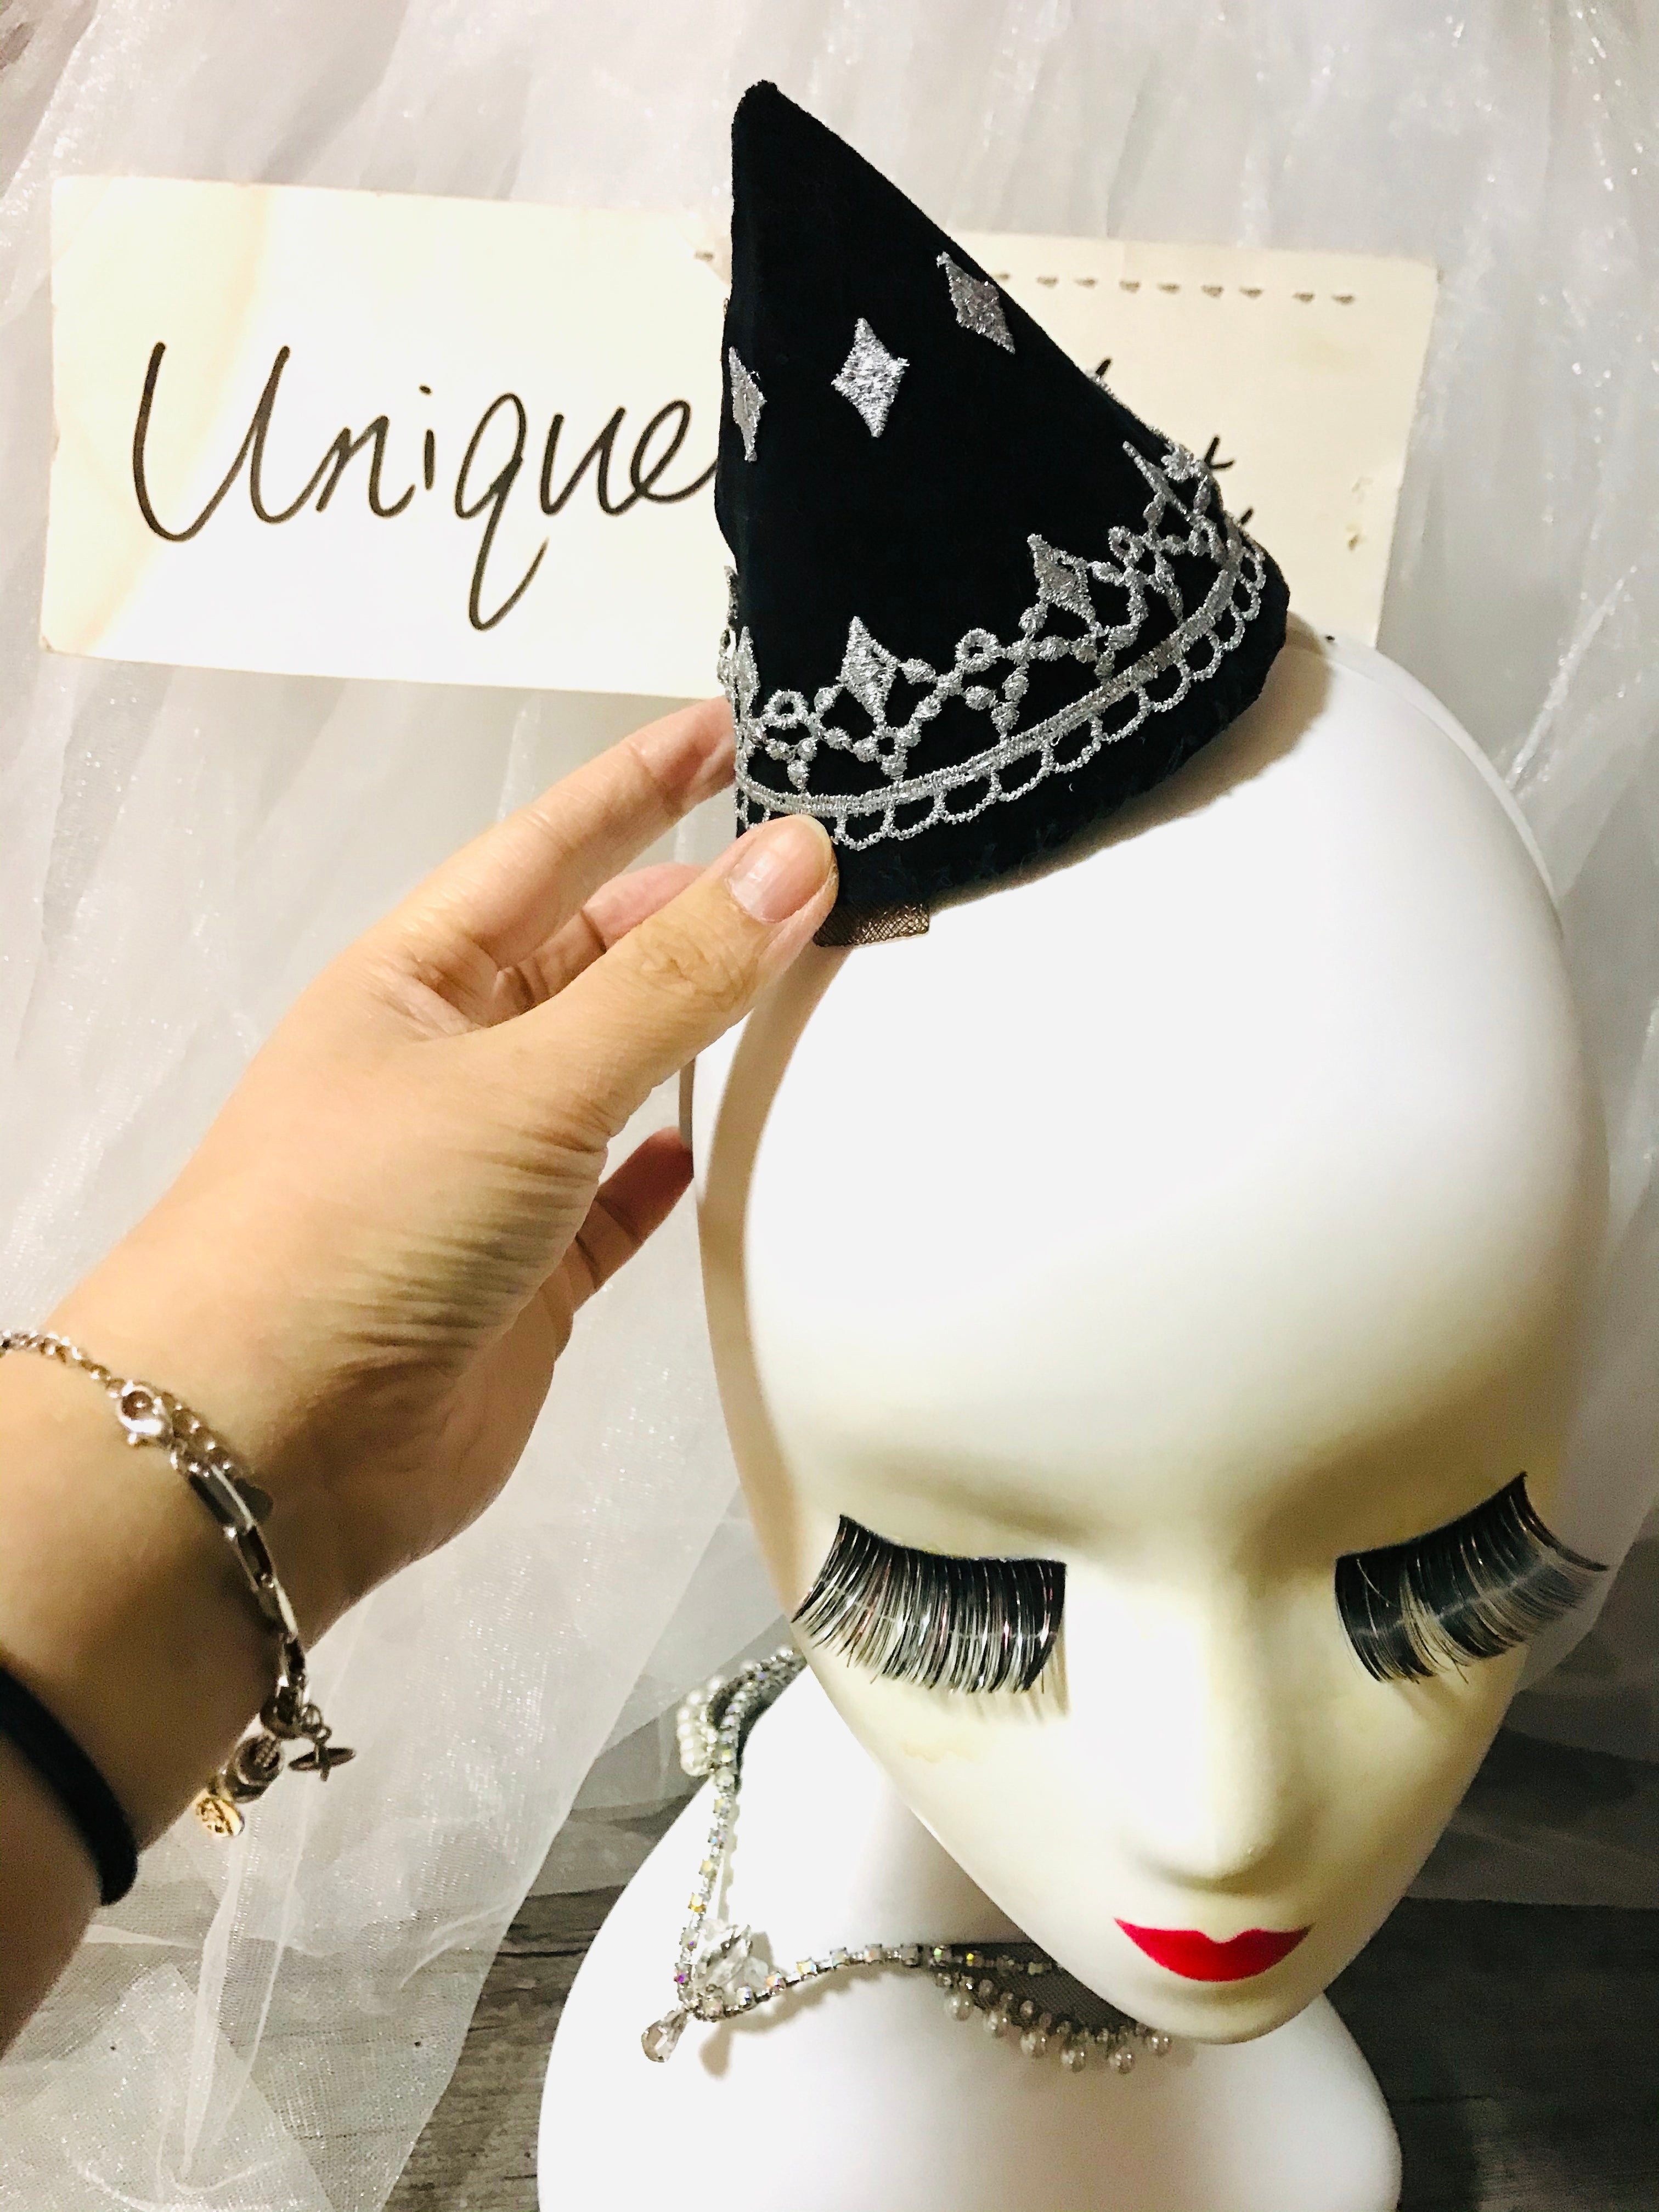 Handmade Harlequinade Hat and Choker Headpiece (Customized To Match Your Costume)